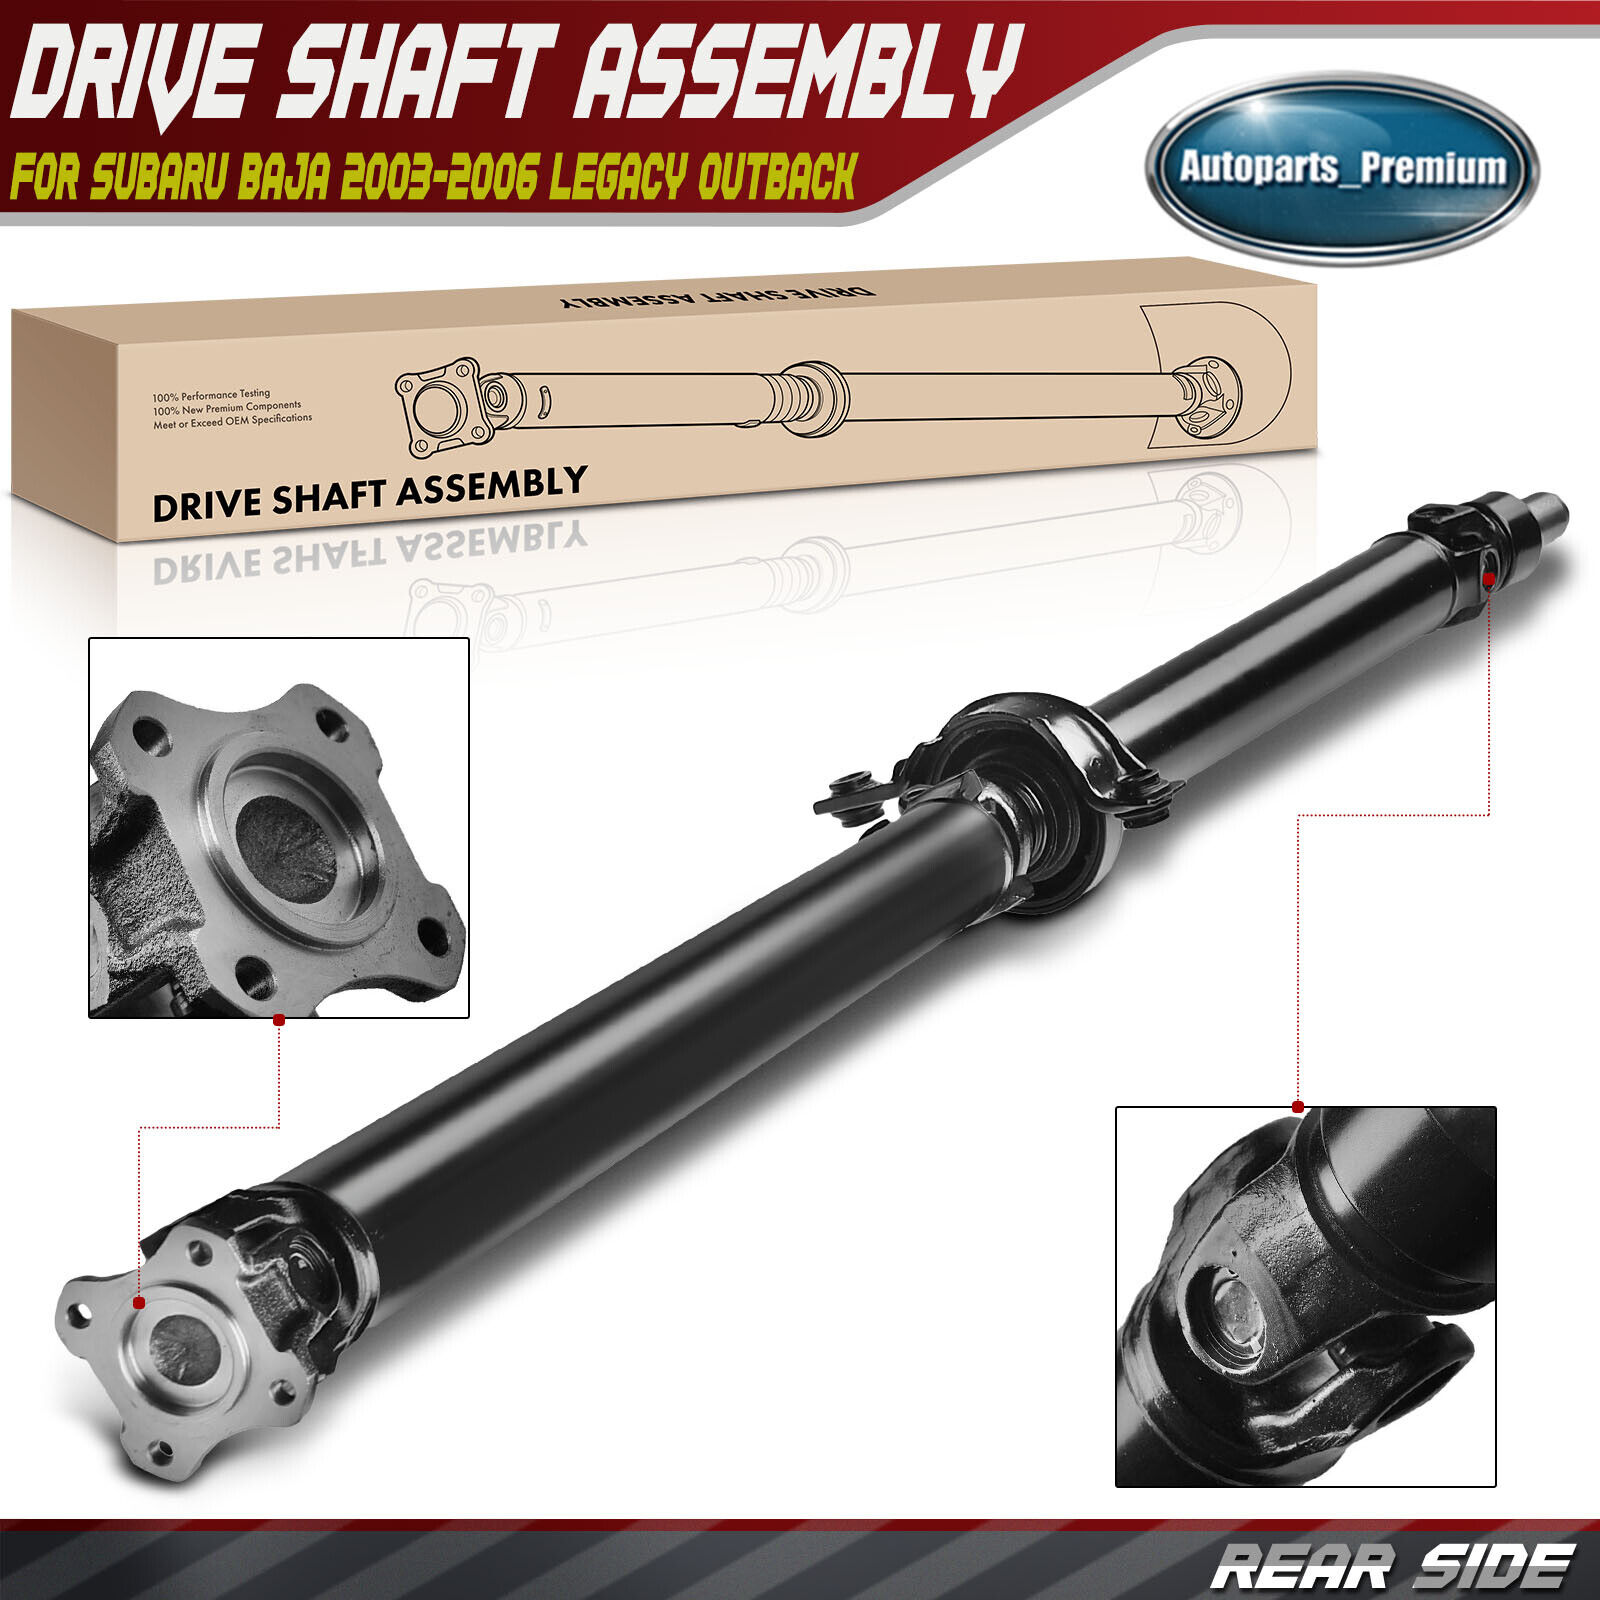 Rear Driveshaft Assembly for Subaru Legacy 96-99 Outback 01-04 AWD Auto Trans.